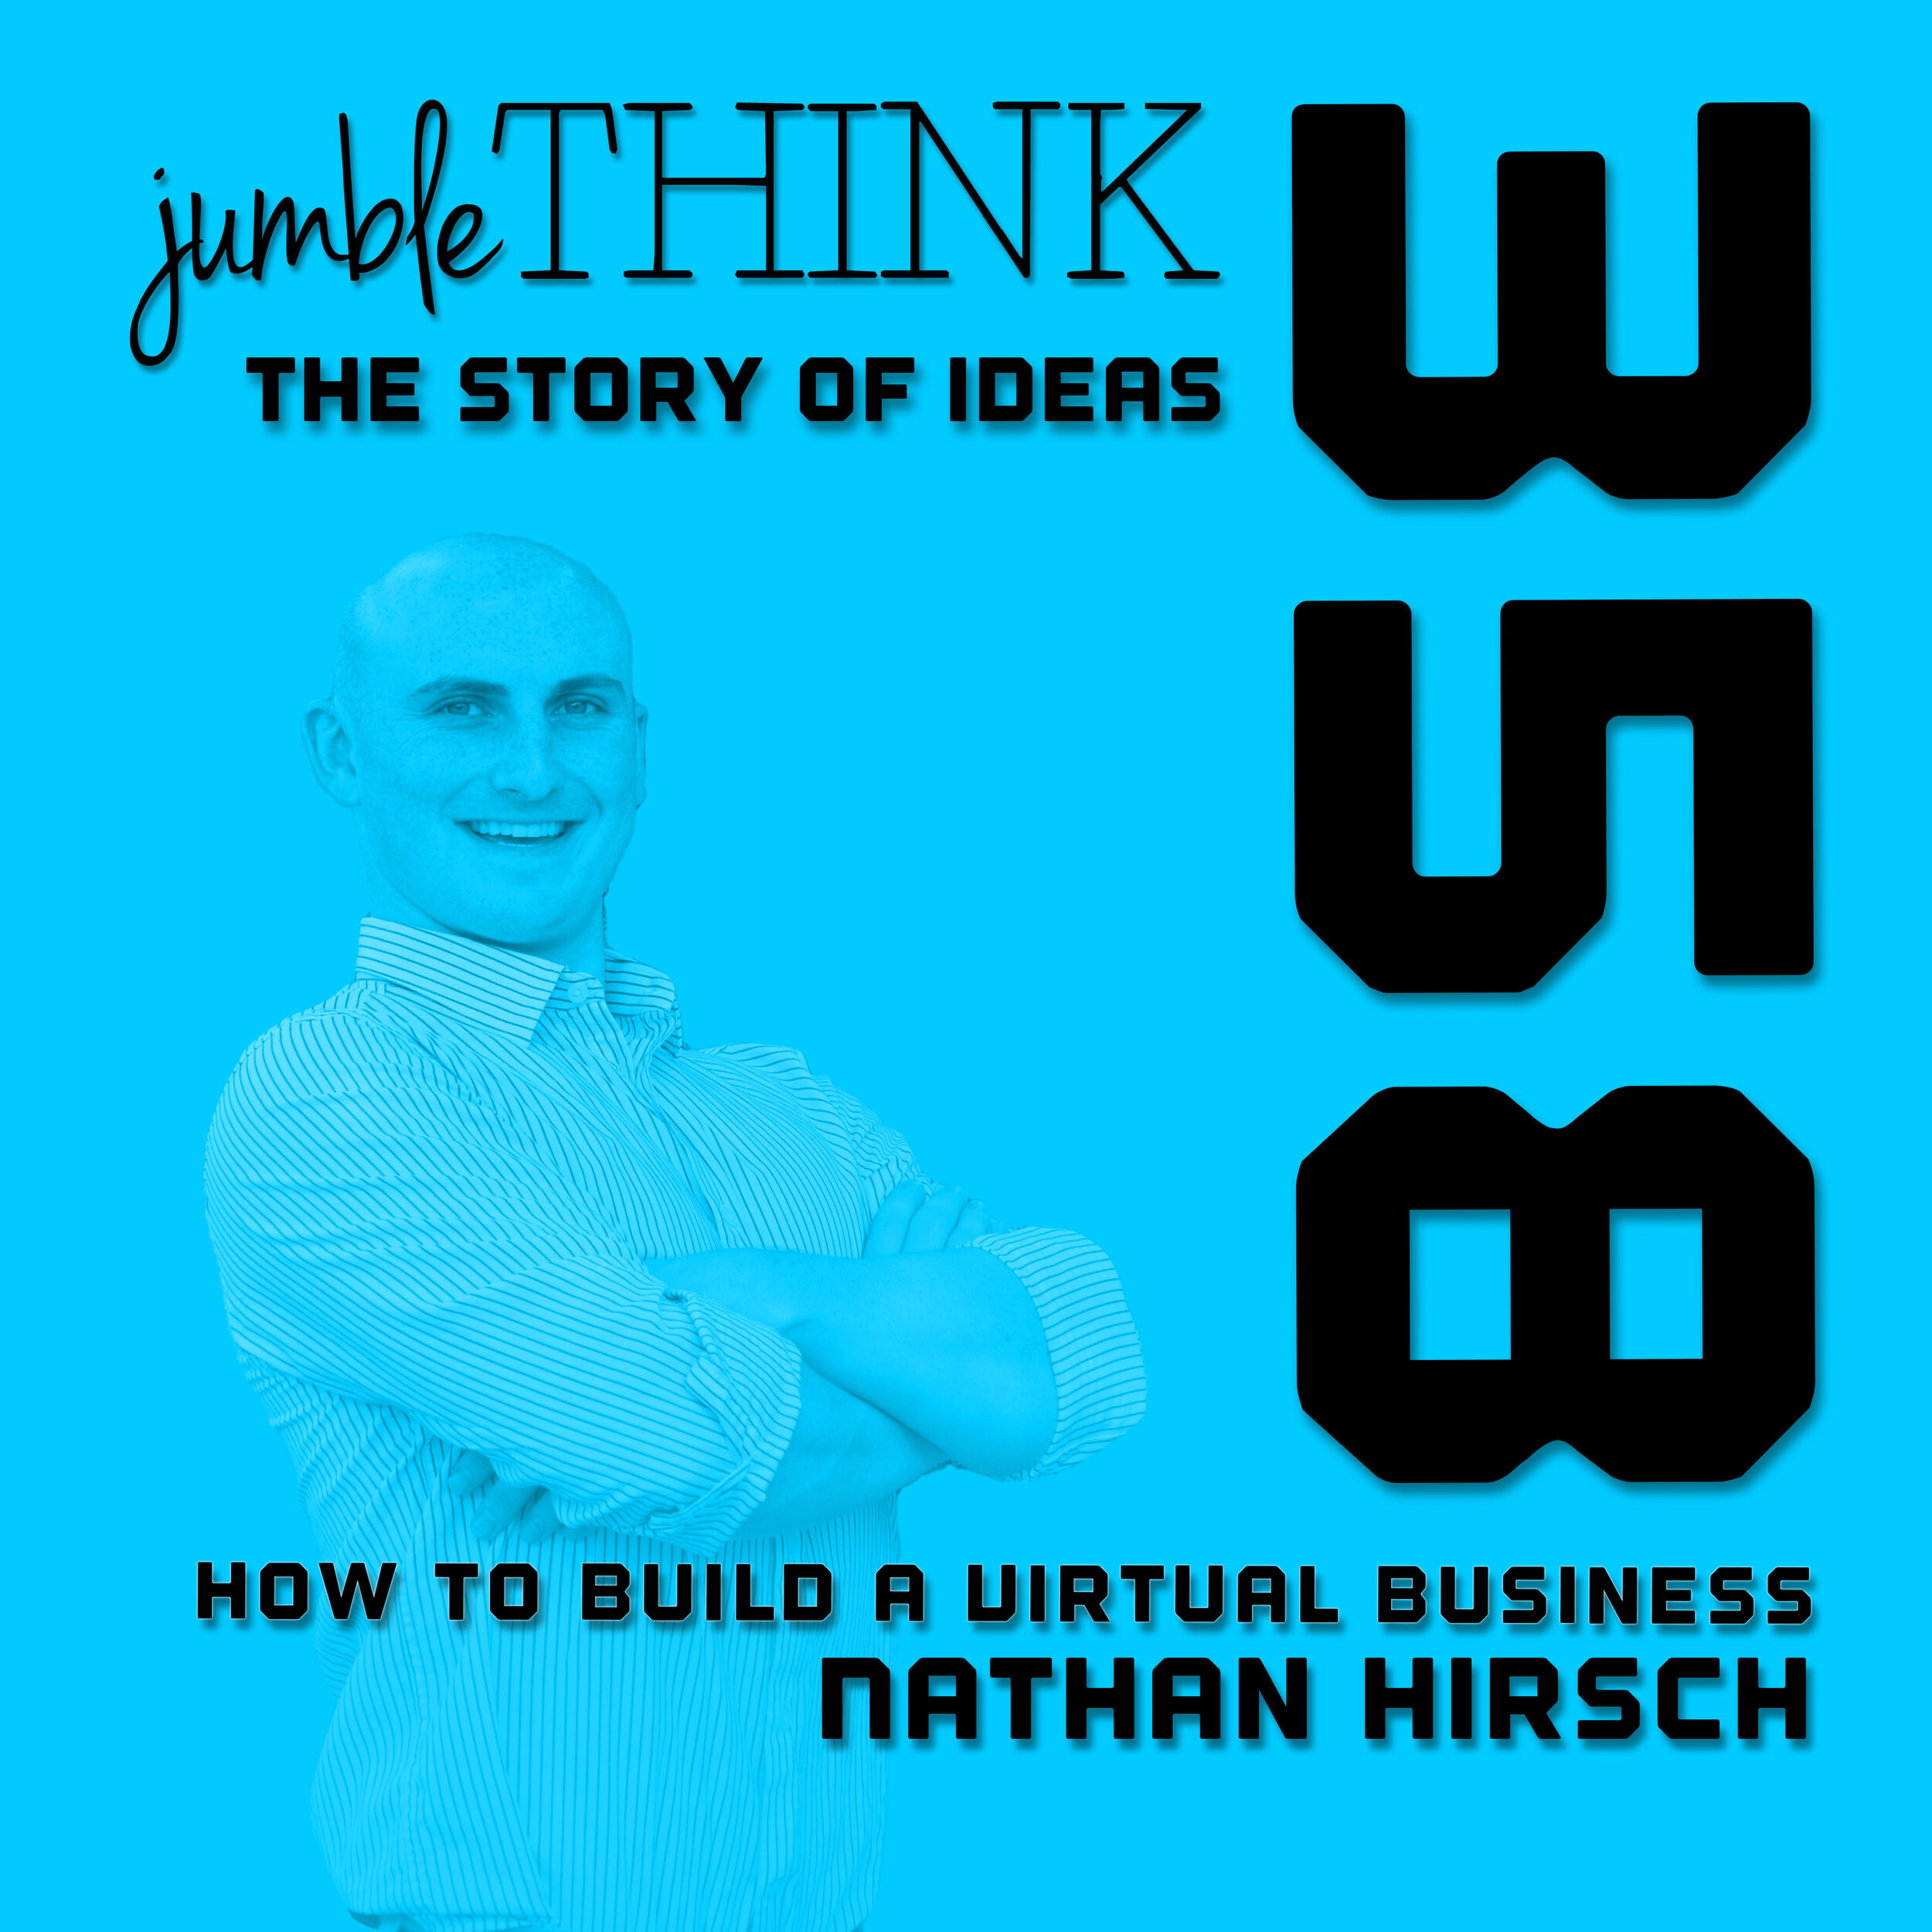 How to Build a Virtual Business